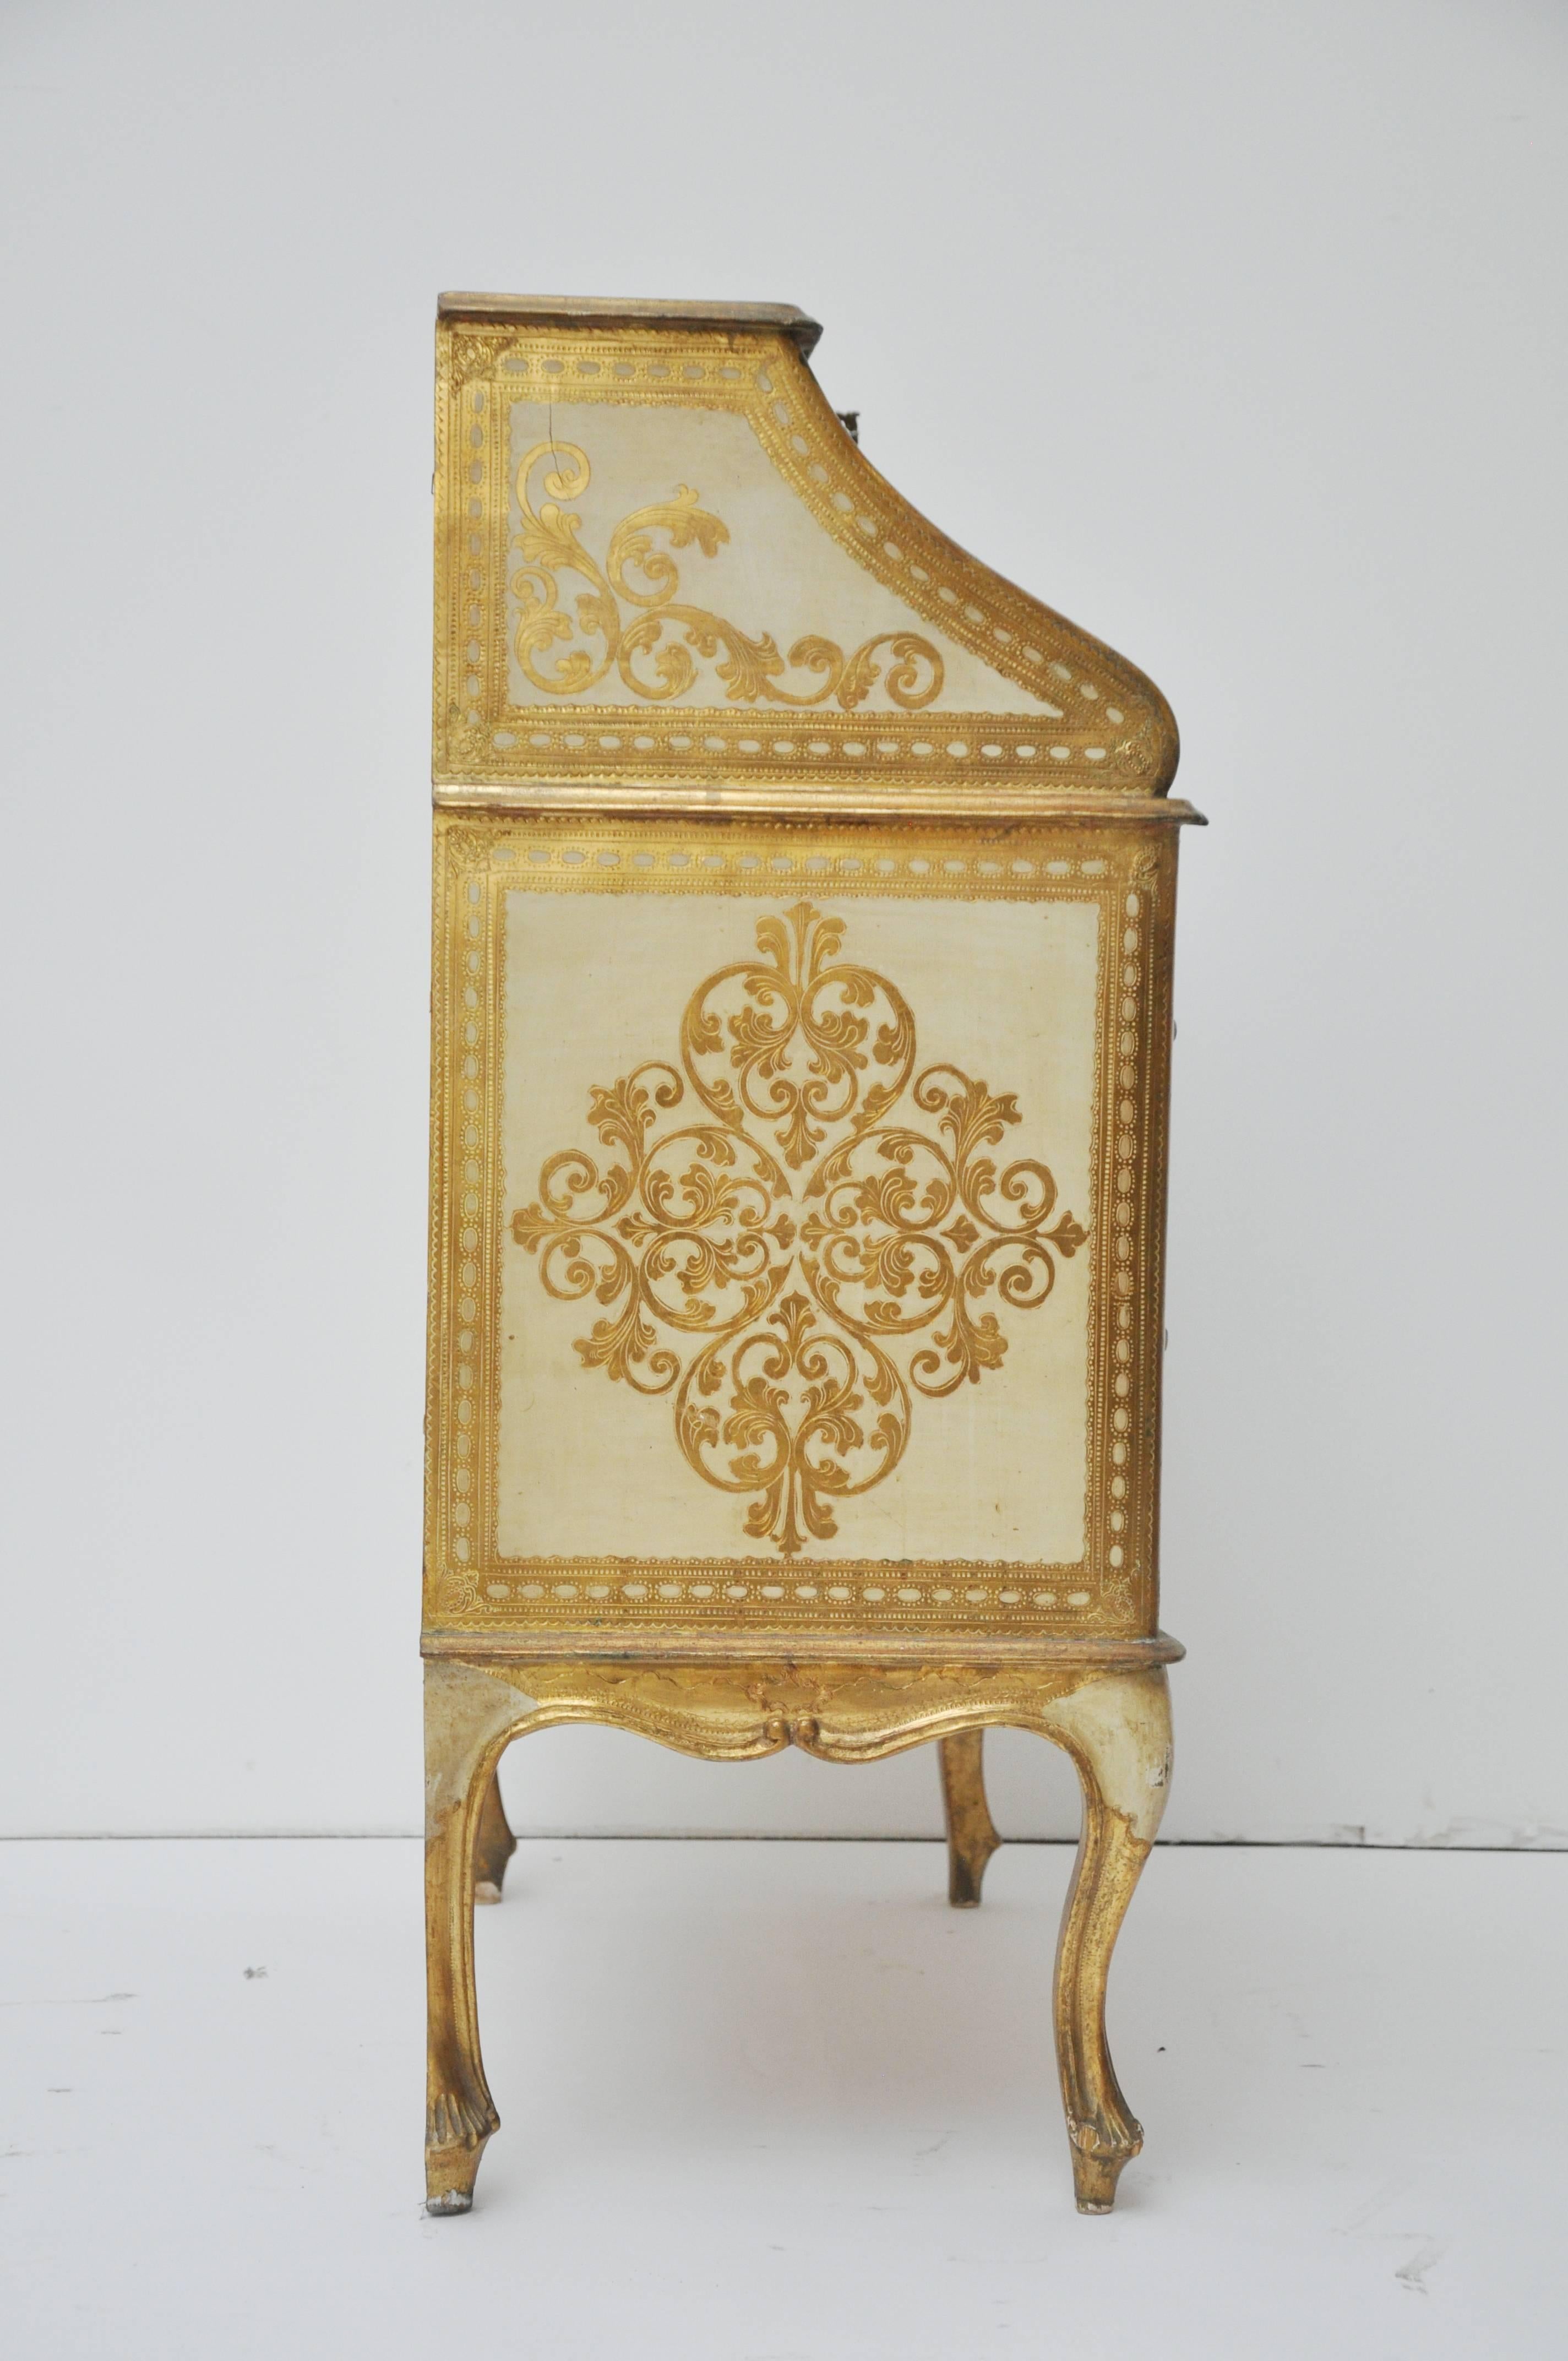 Diminutive hand-painted Italian desk with key and tassel. Beautiful gilded designs. Height to open desk top 30.38